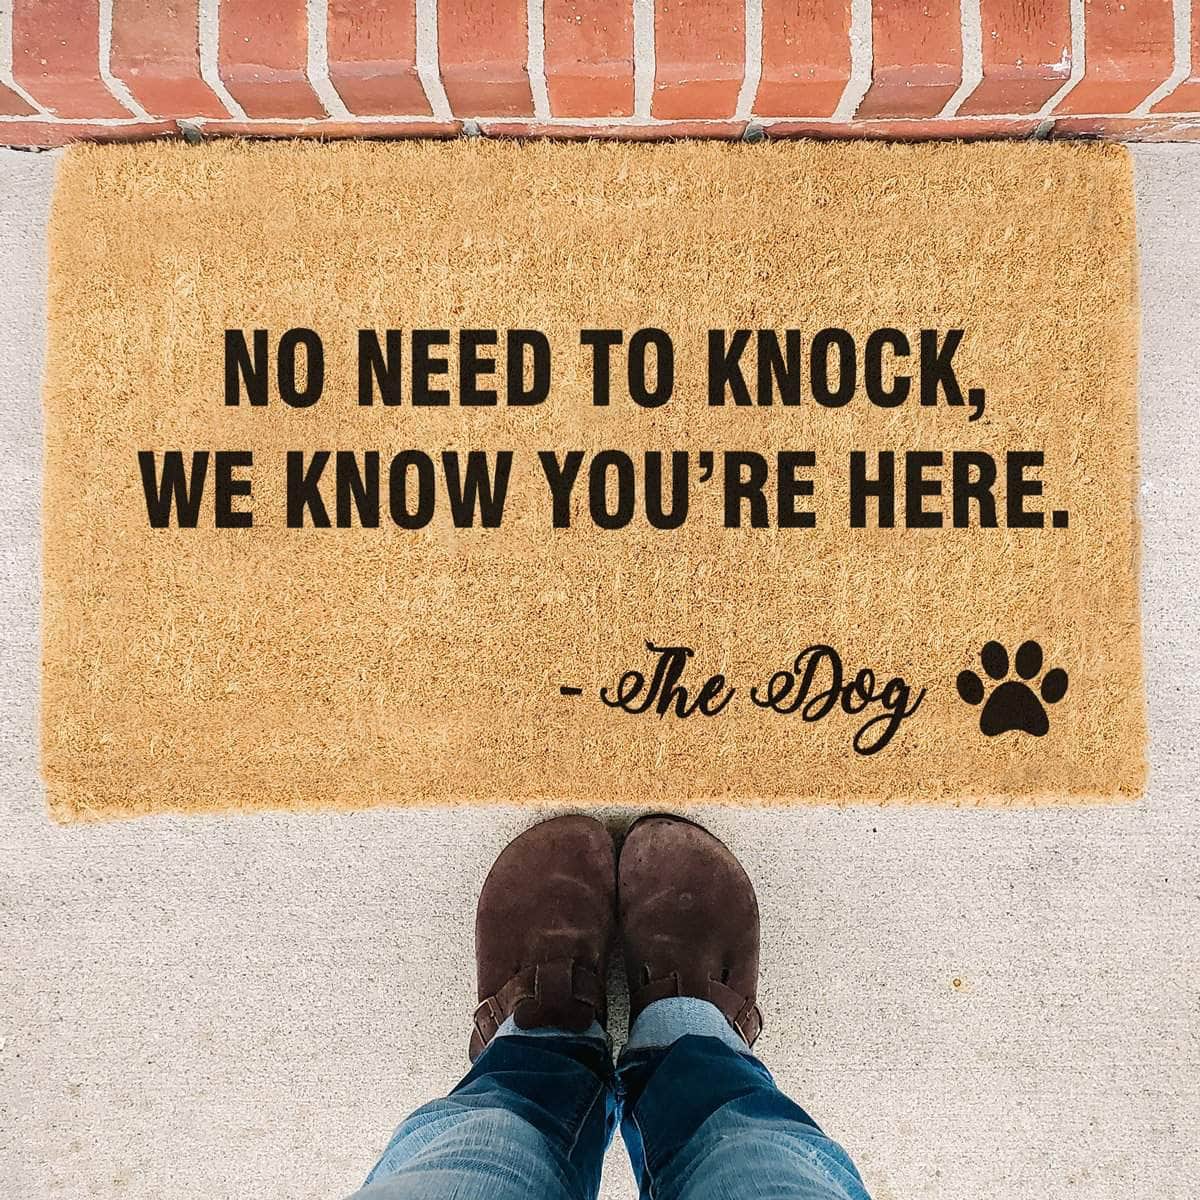 No Need To Knock, We Know You're Here - Doormat